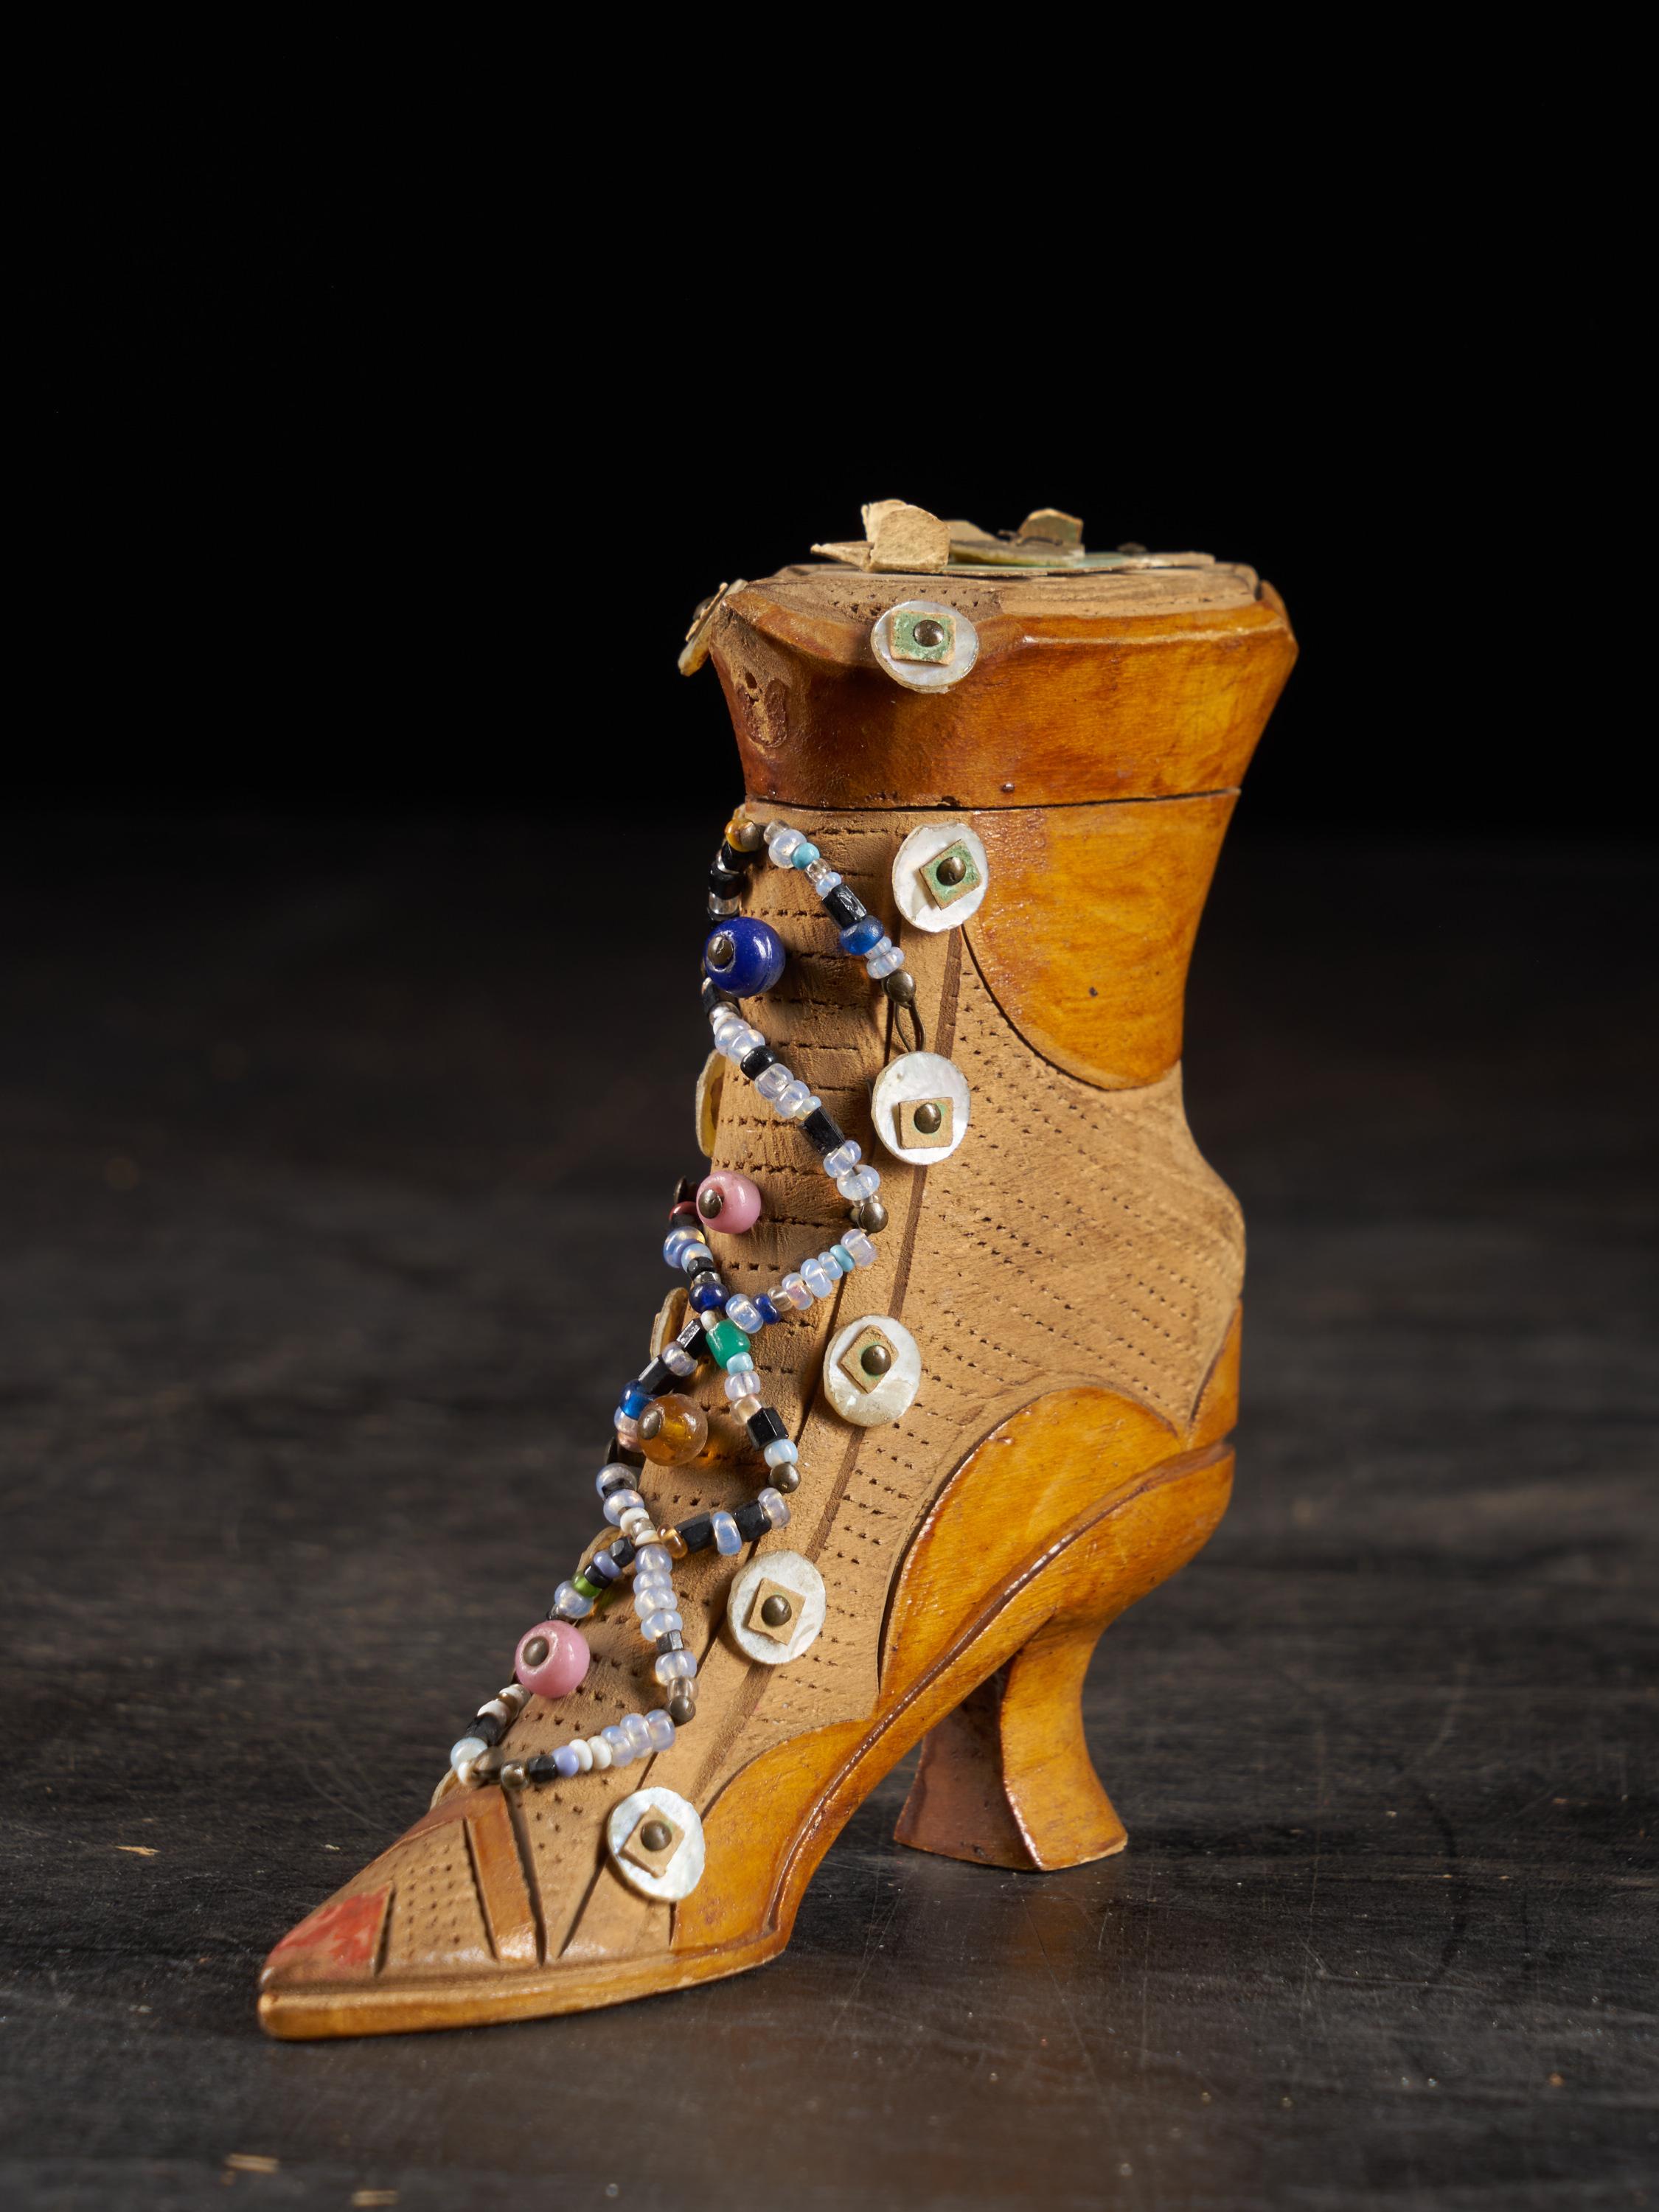 These stunning and unique Miniature Georgian shoes were produced in England during the early 19th century, circa 1830. They are hand carved from Mahogany wood and feature the most wonderful hand worked decorations in mother of pearl. There are some